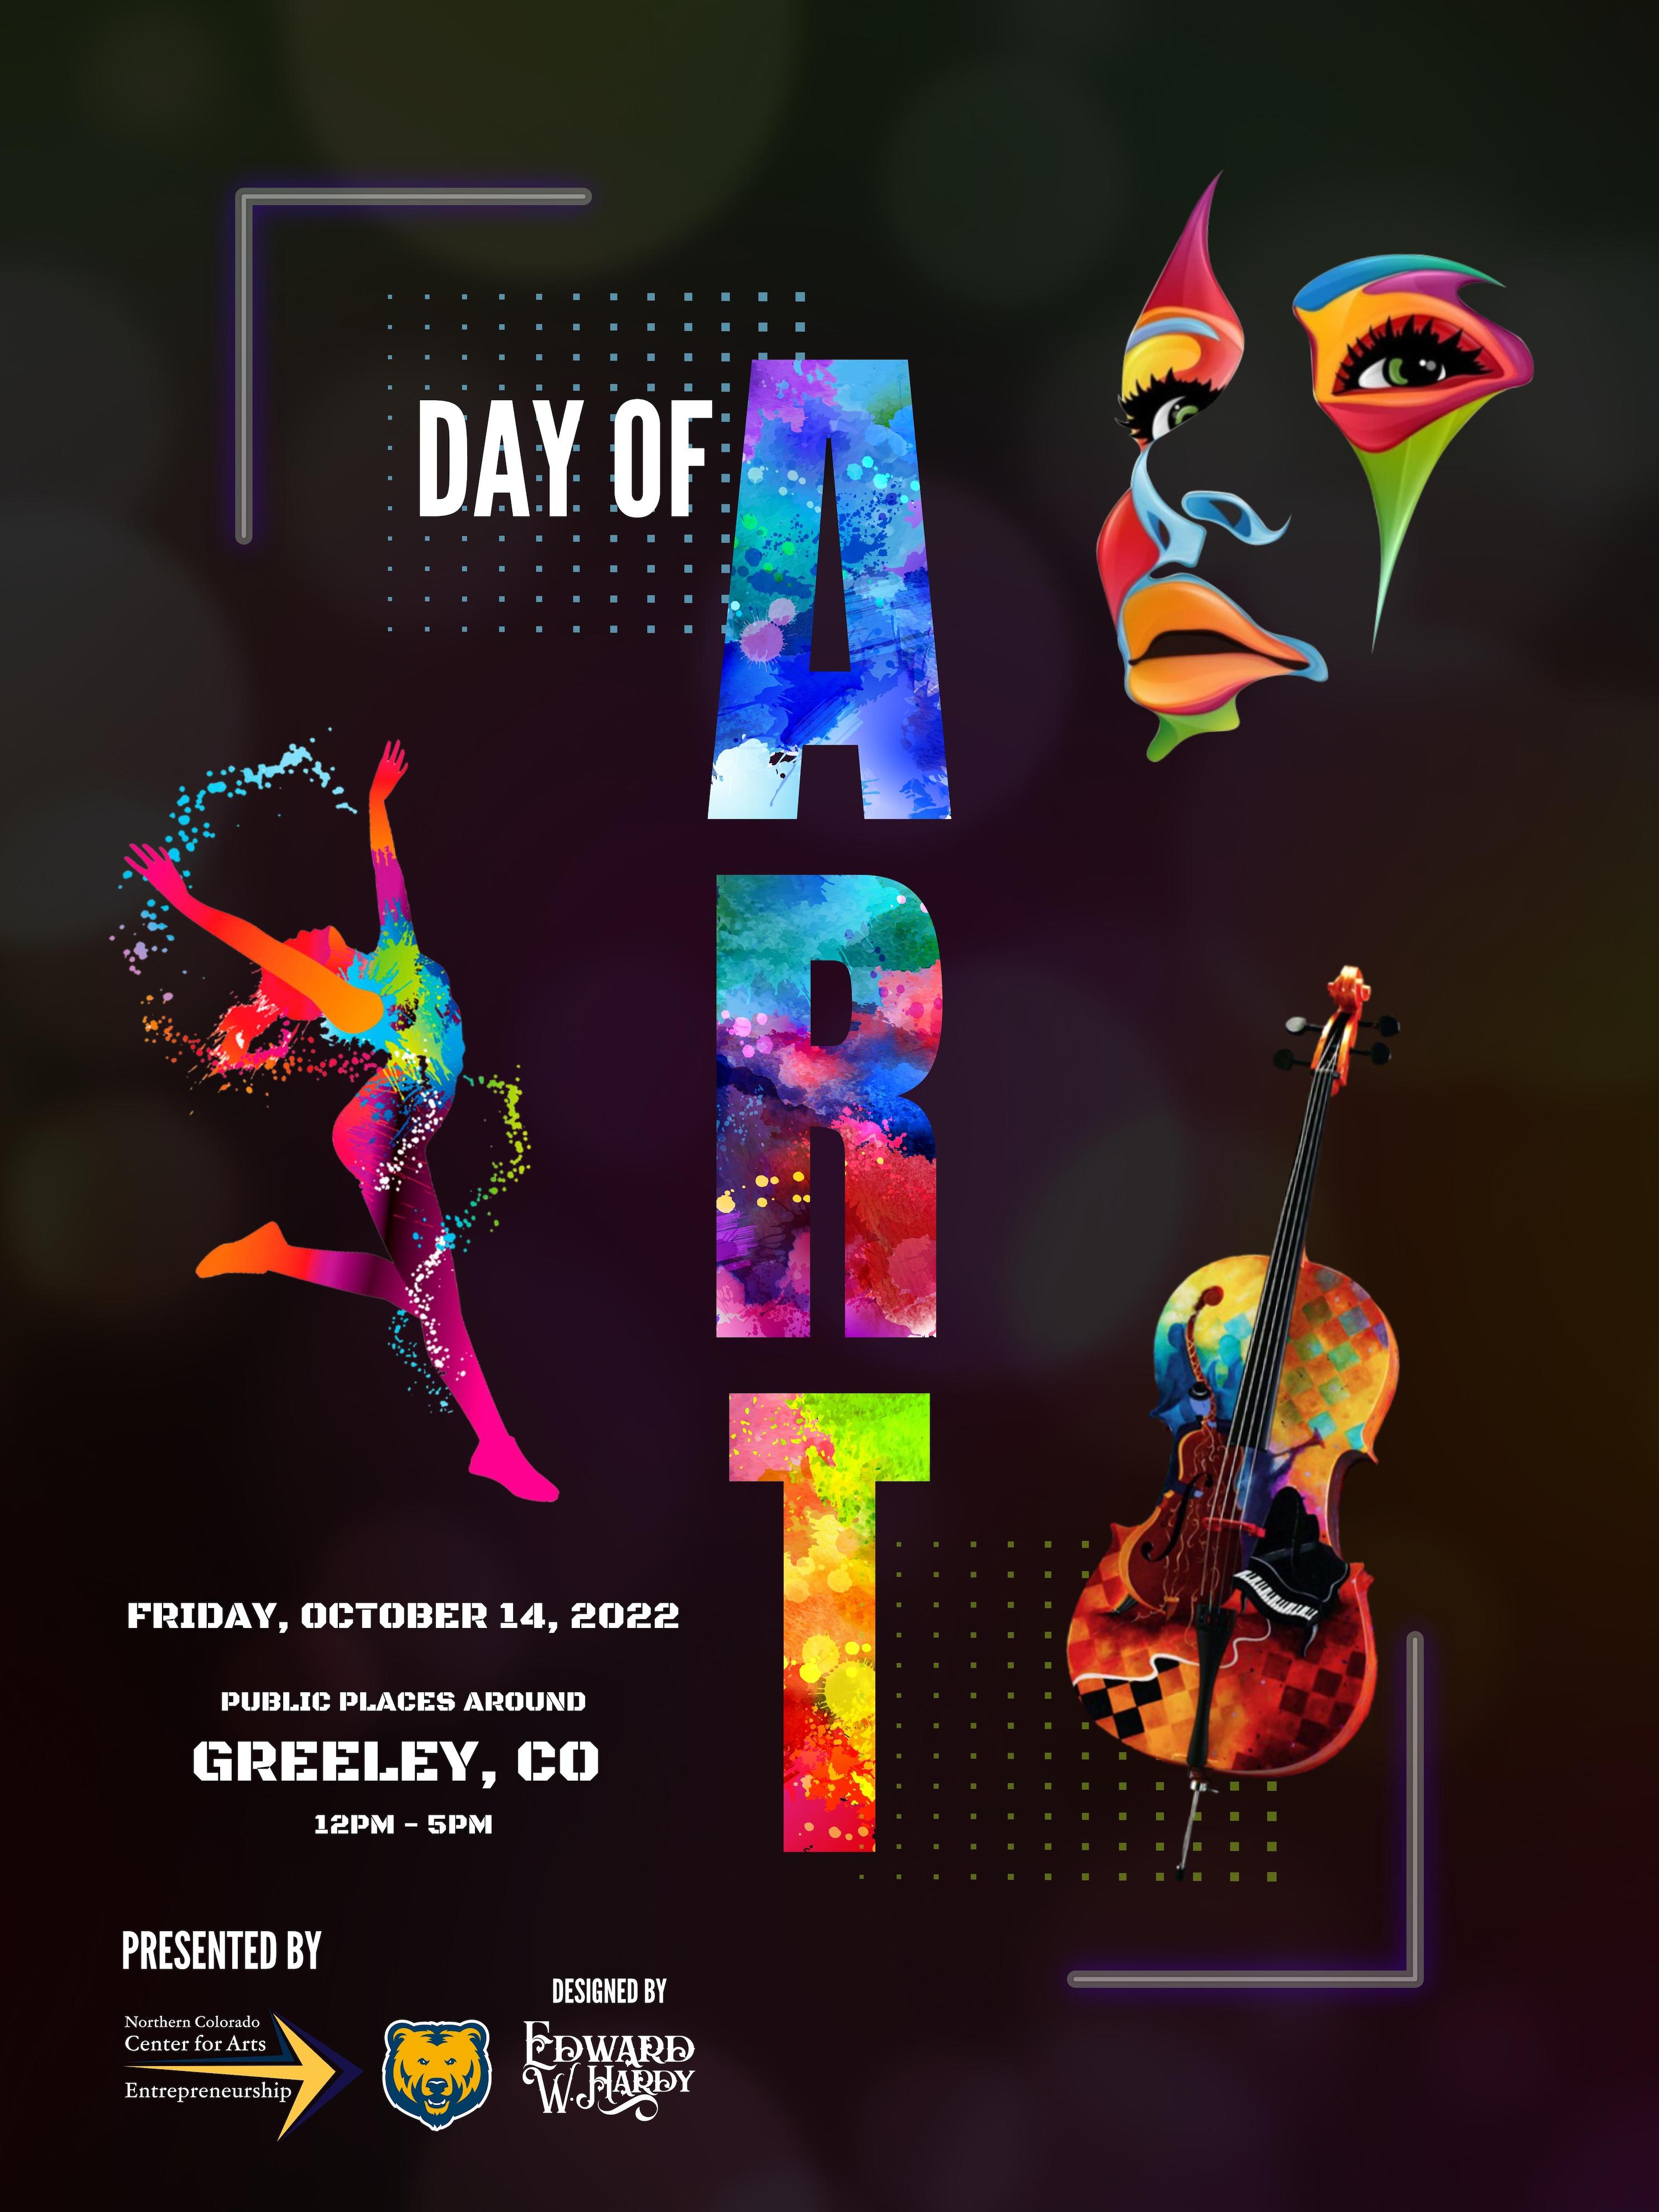 Day of Art (2022) Poster